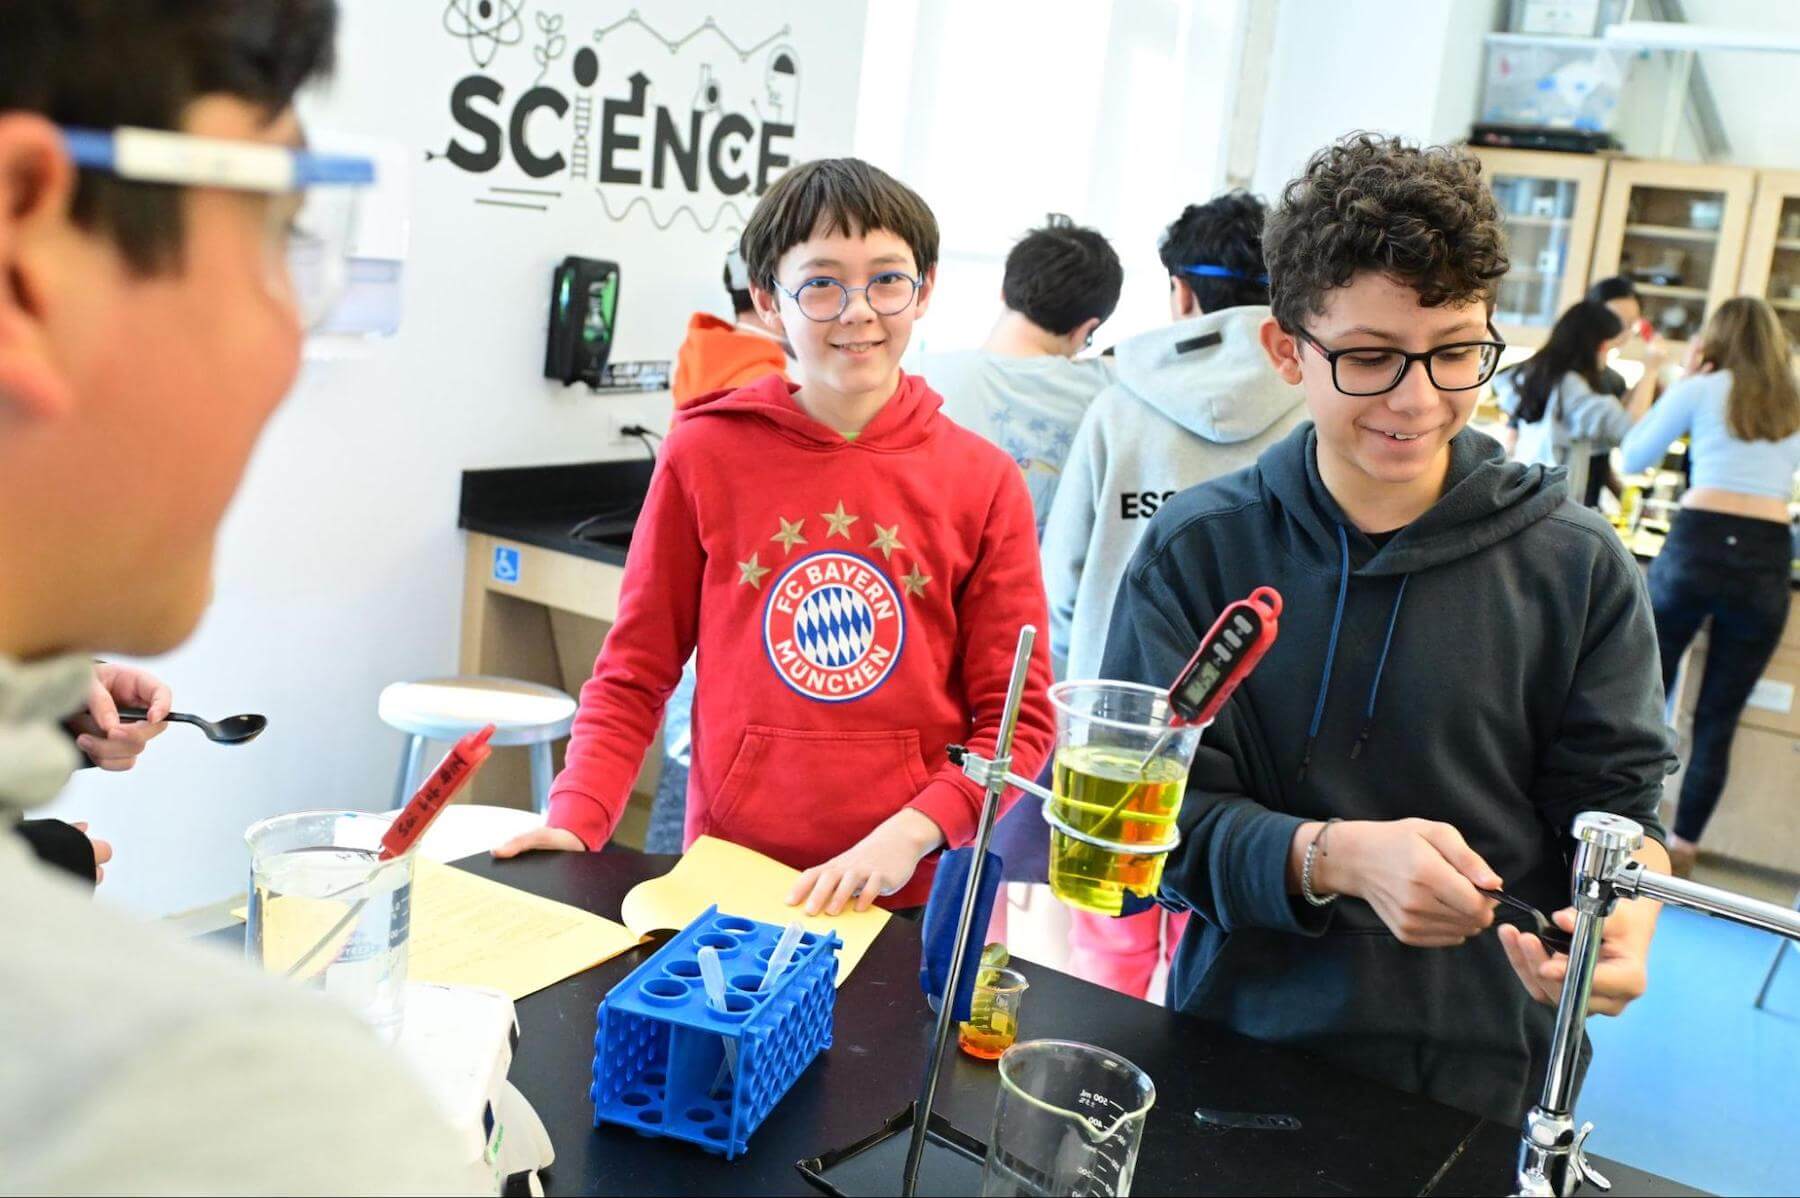 7th Grade students at Ethical Culture Fieldston School perform a science experiment.